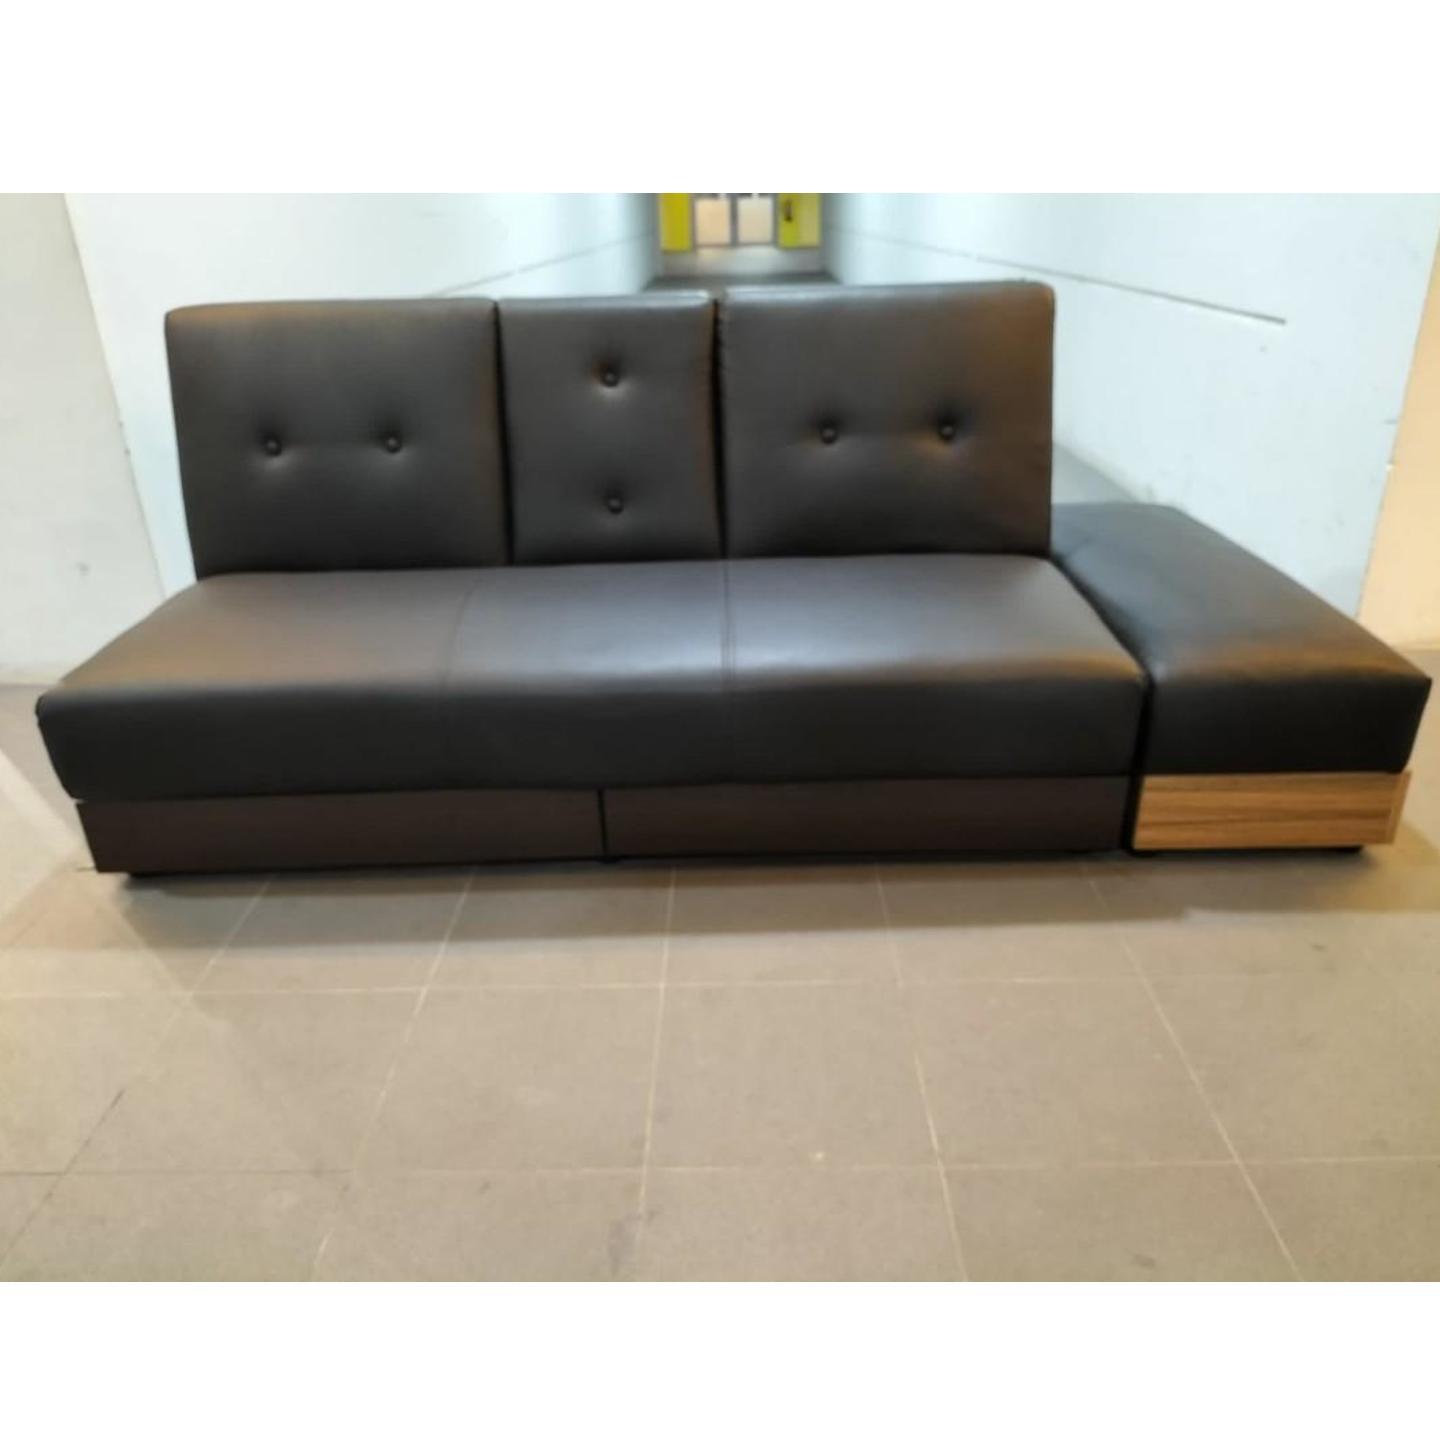 MIKO Storage Sofa Bed in BLACK Faux Leather